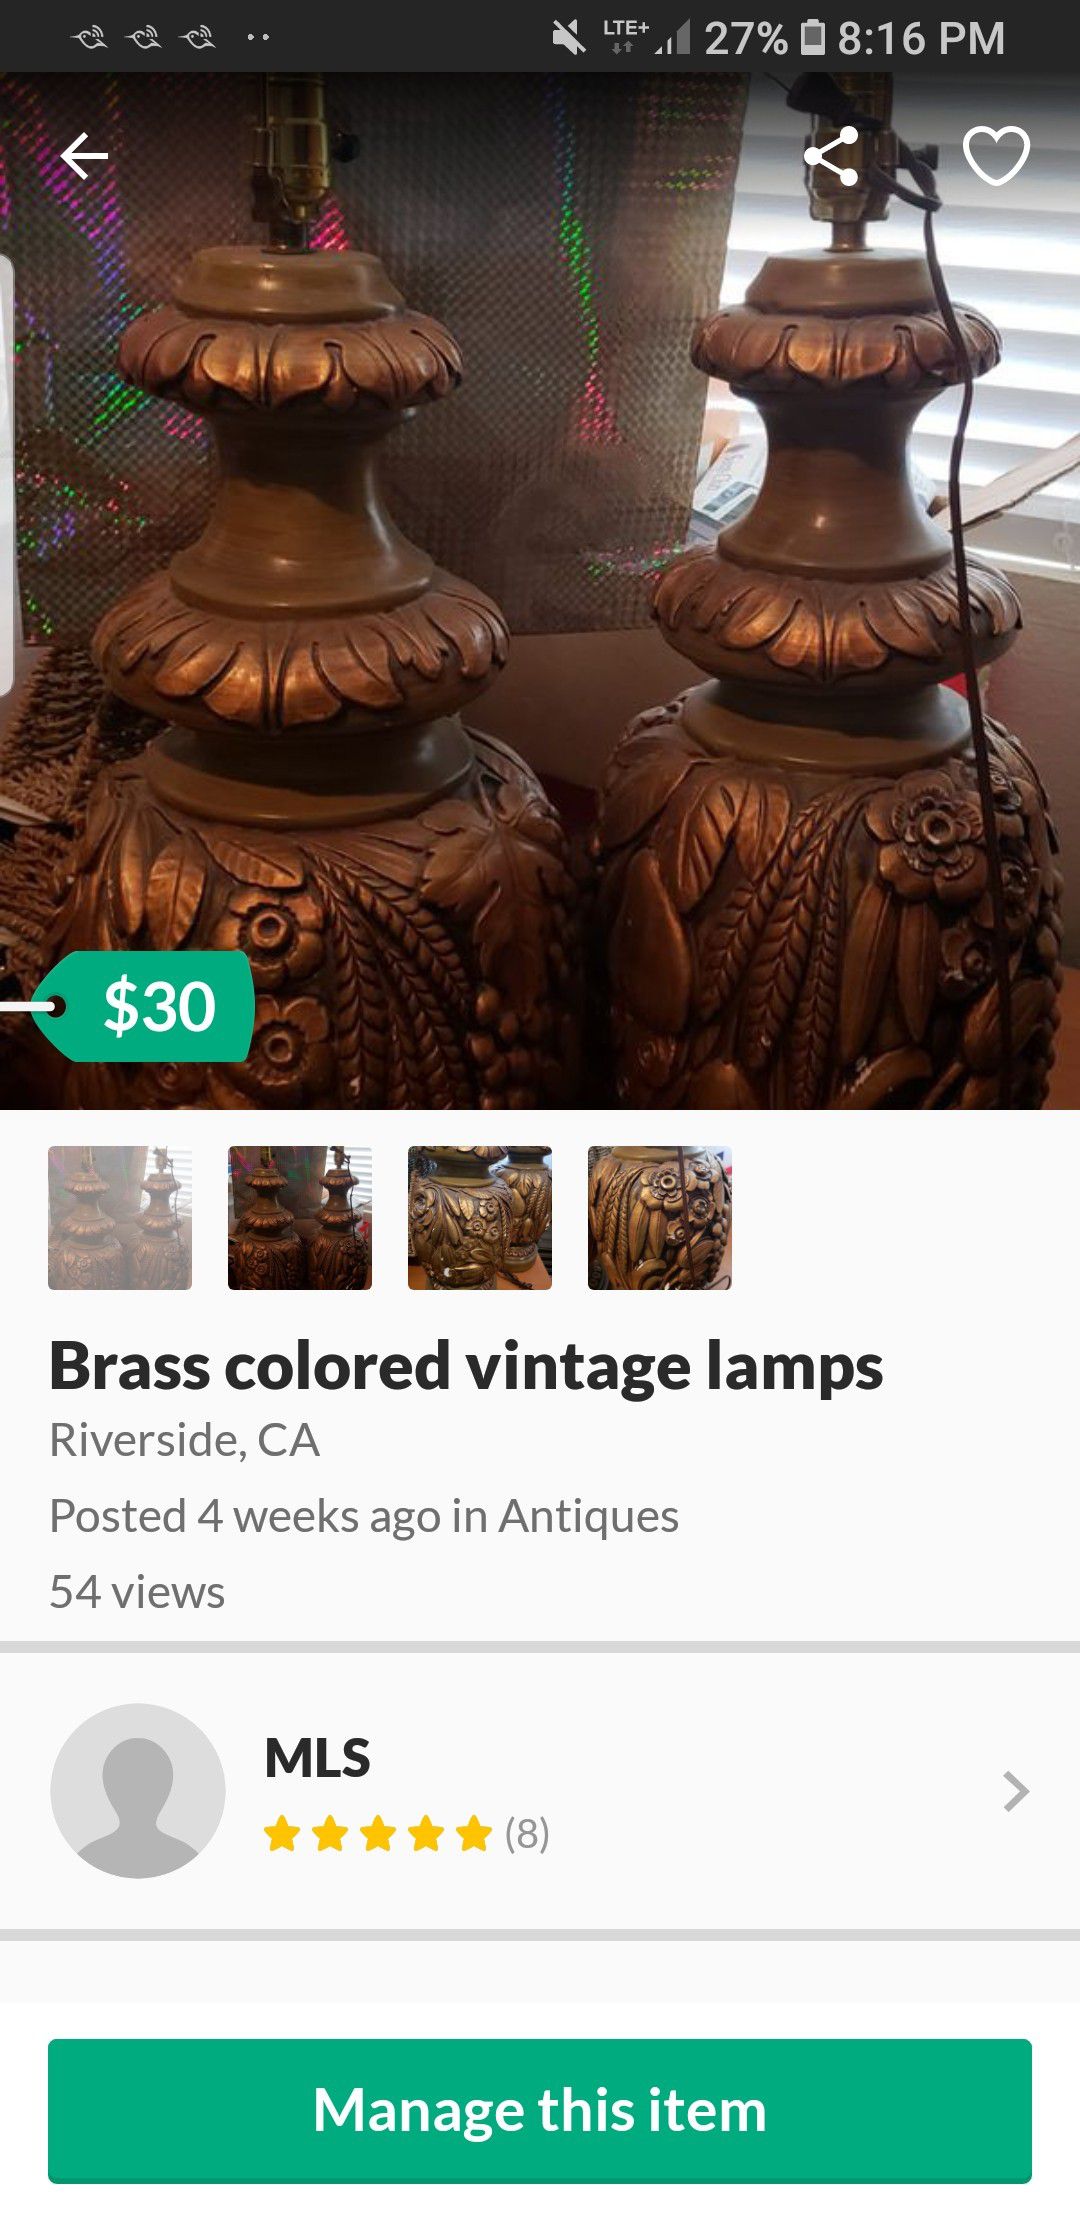 Brass colored lamps